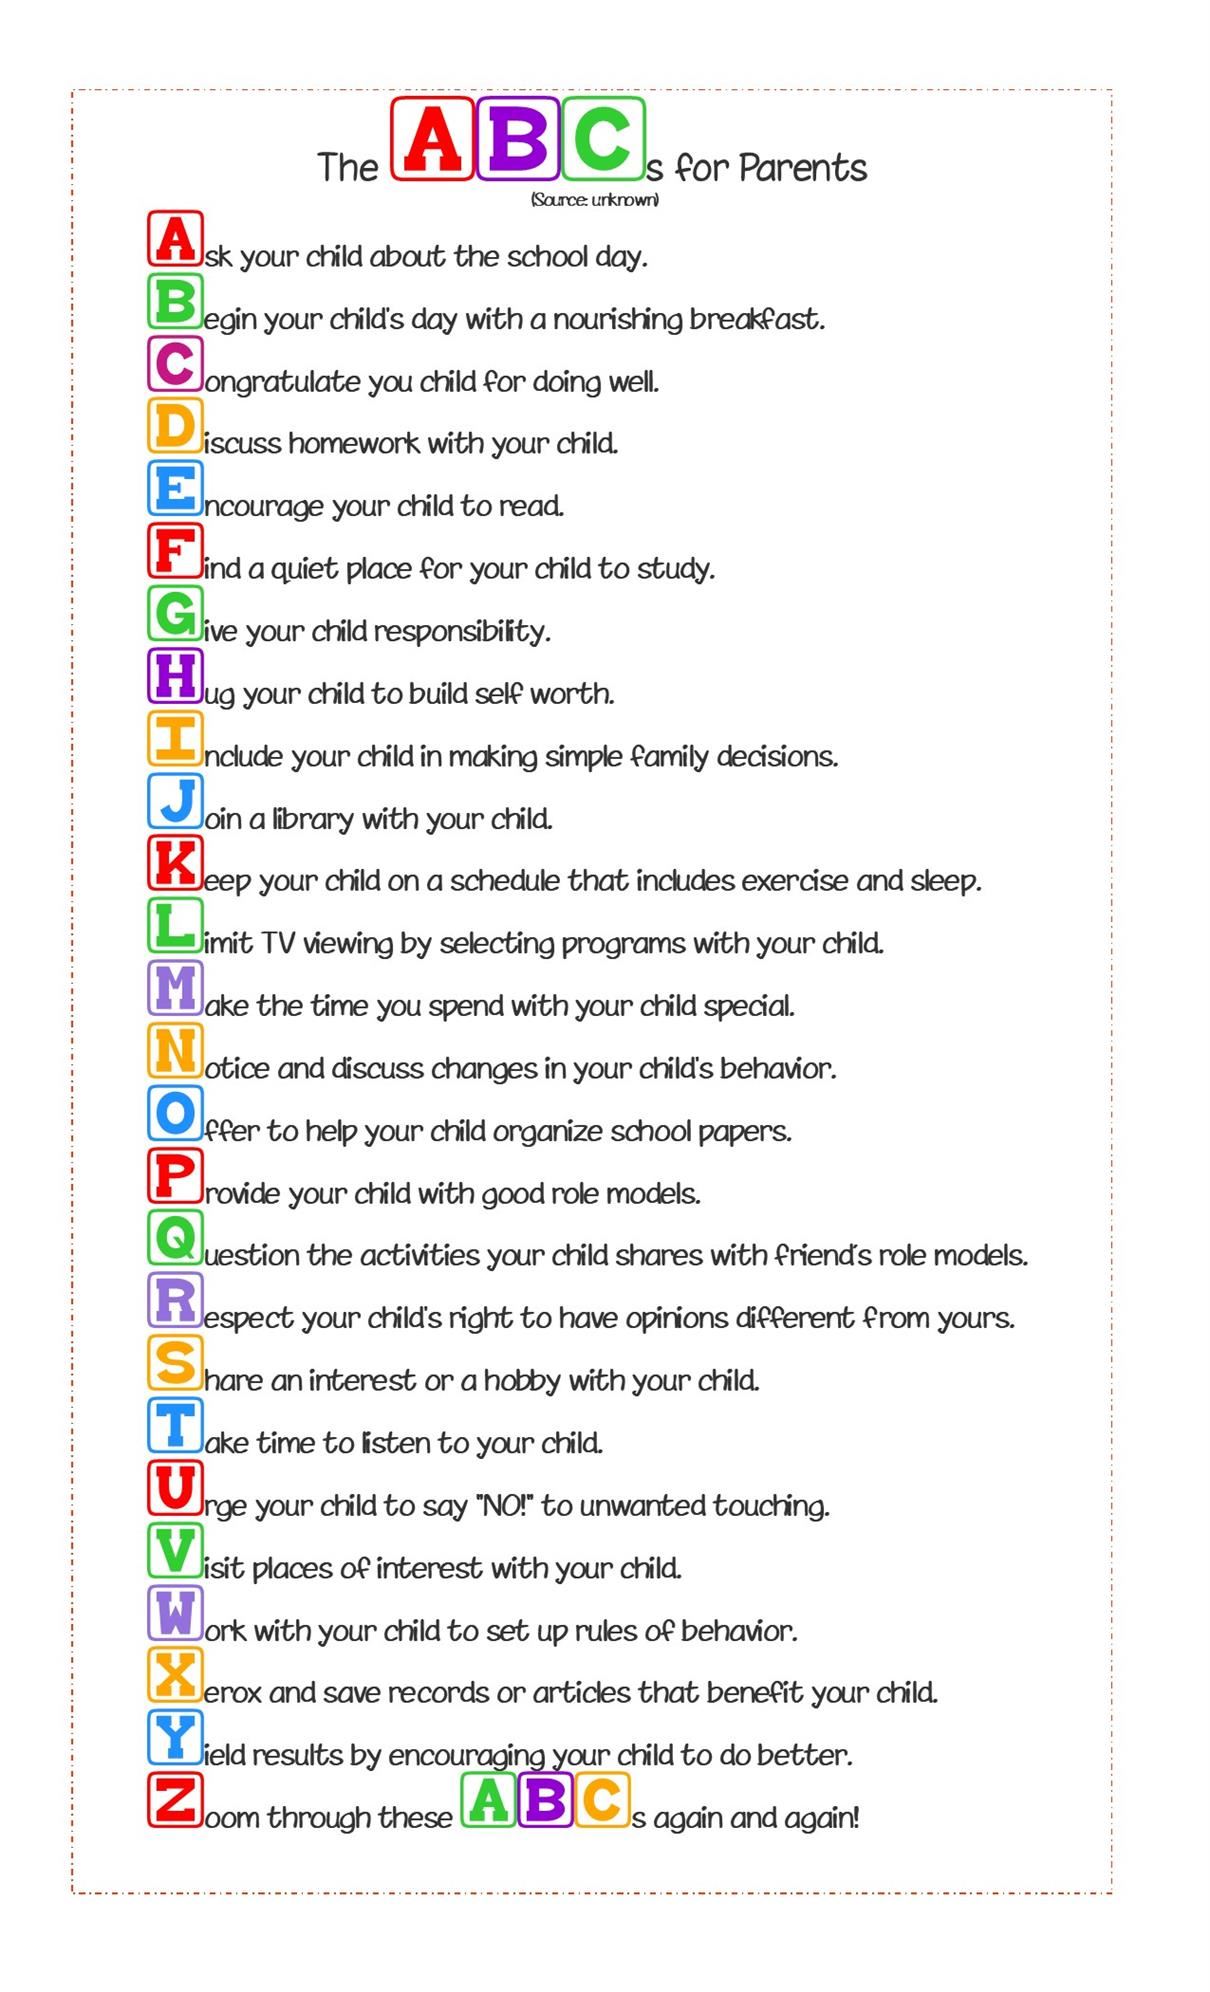 The ABC's for Parents 